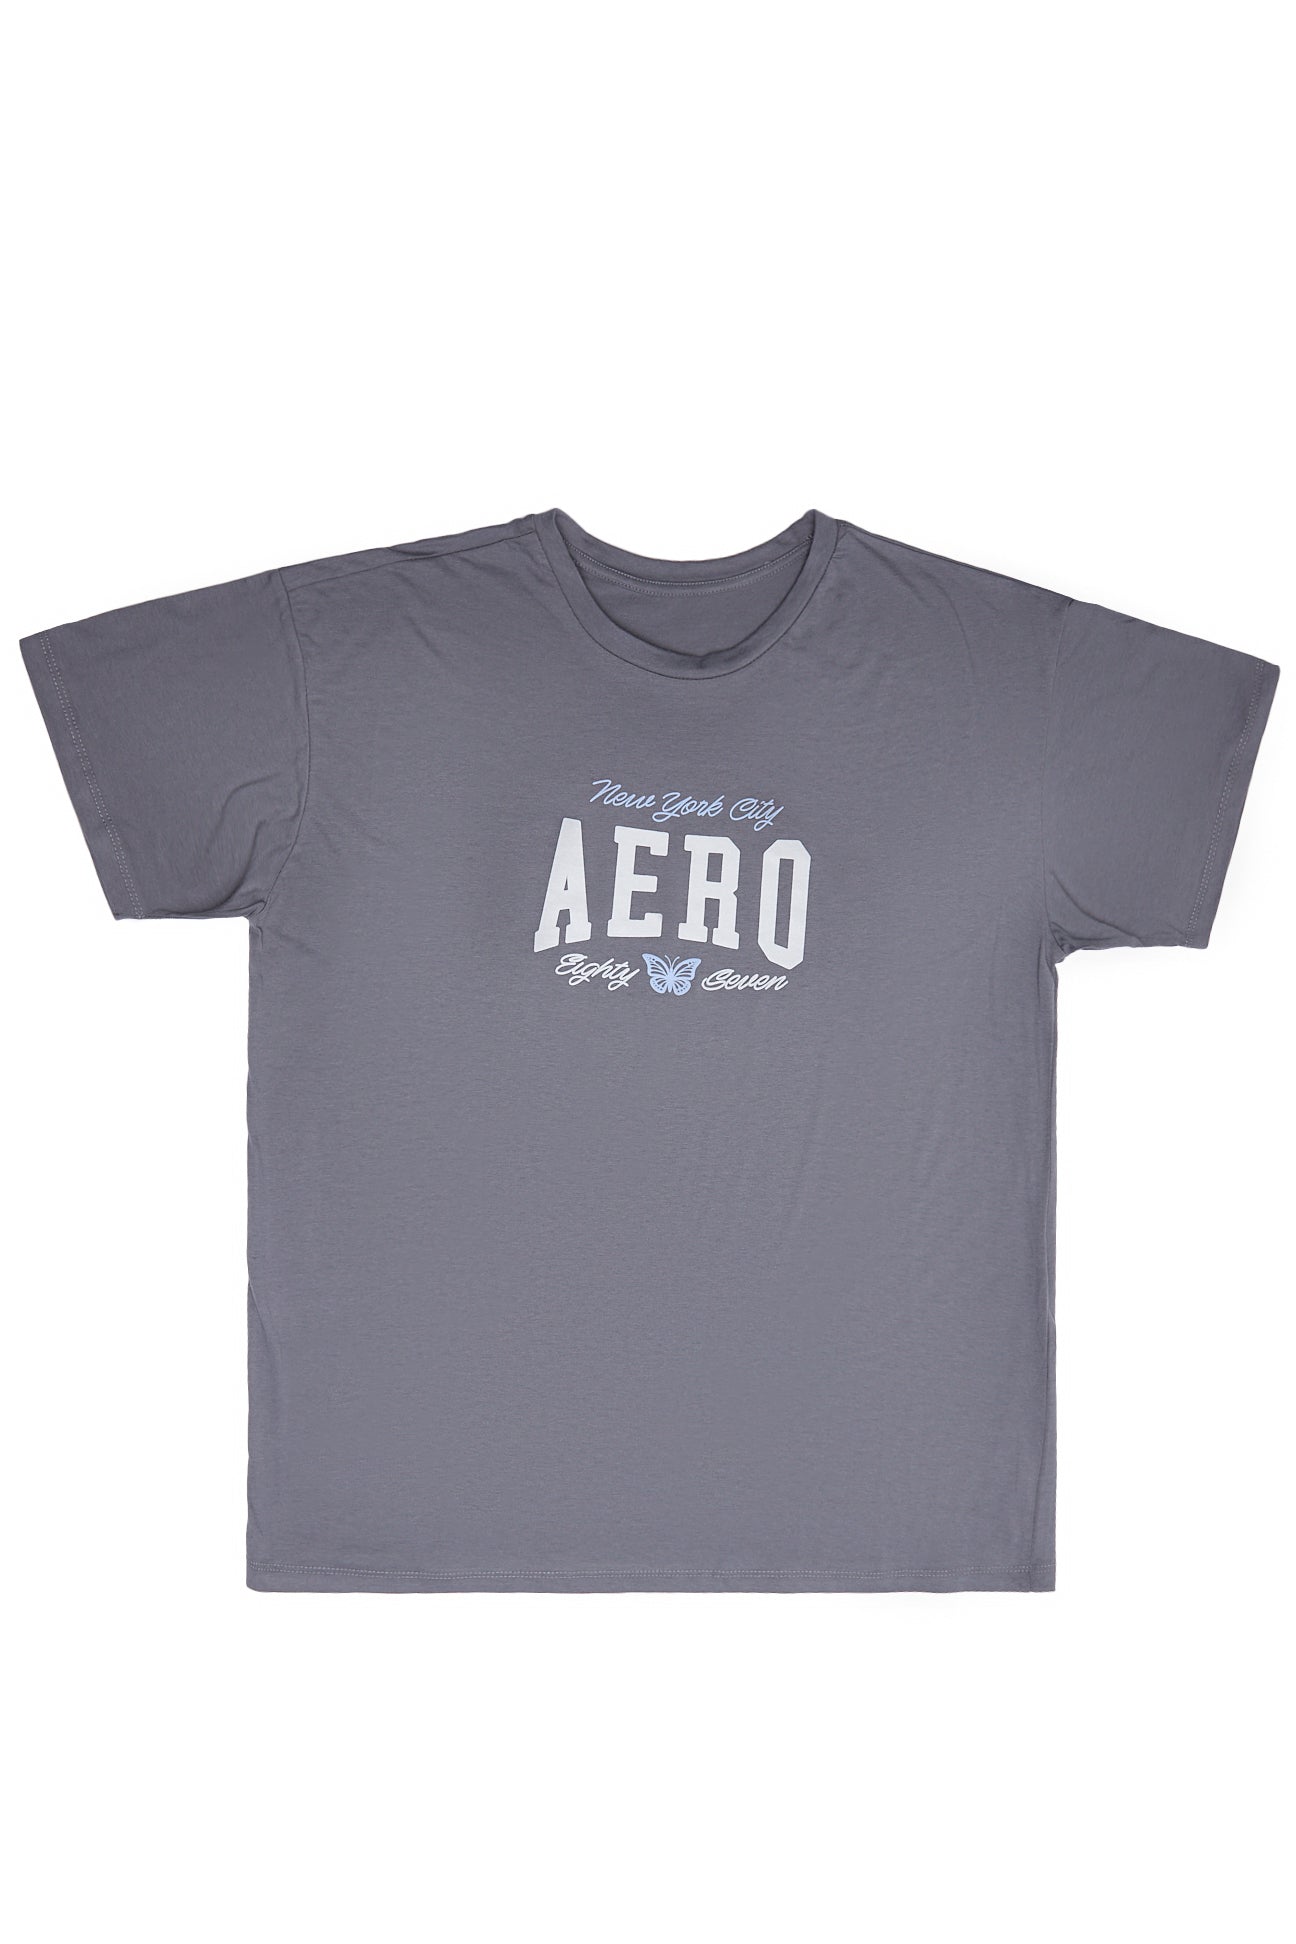 AERO New York City Butterfly Graphic Relaxed Tee